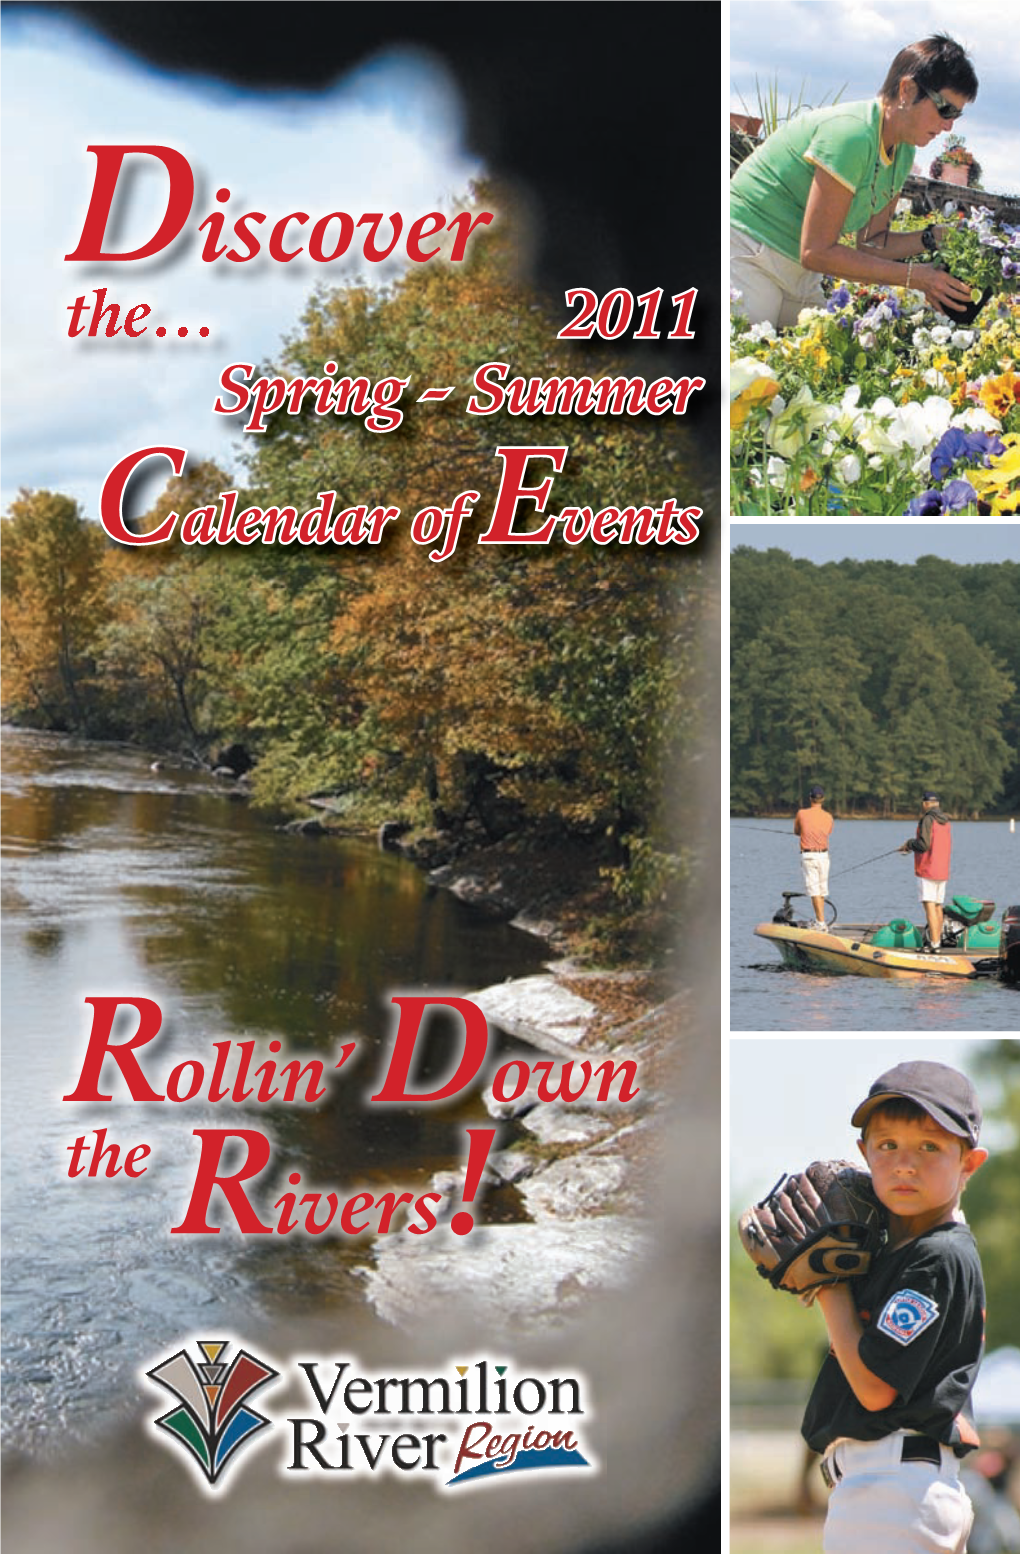 Discover The… 2011 Spring - Summer Calendar of Events